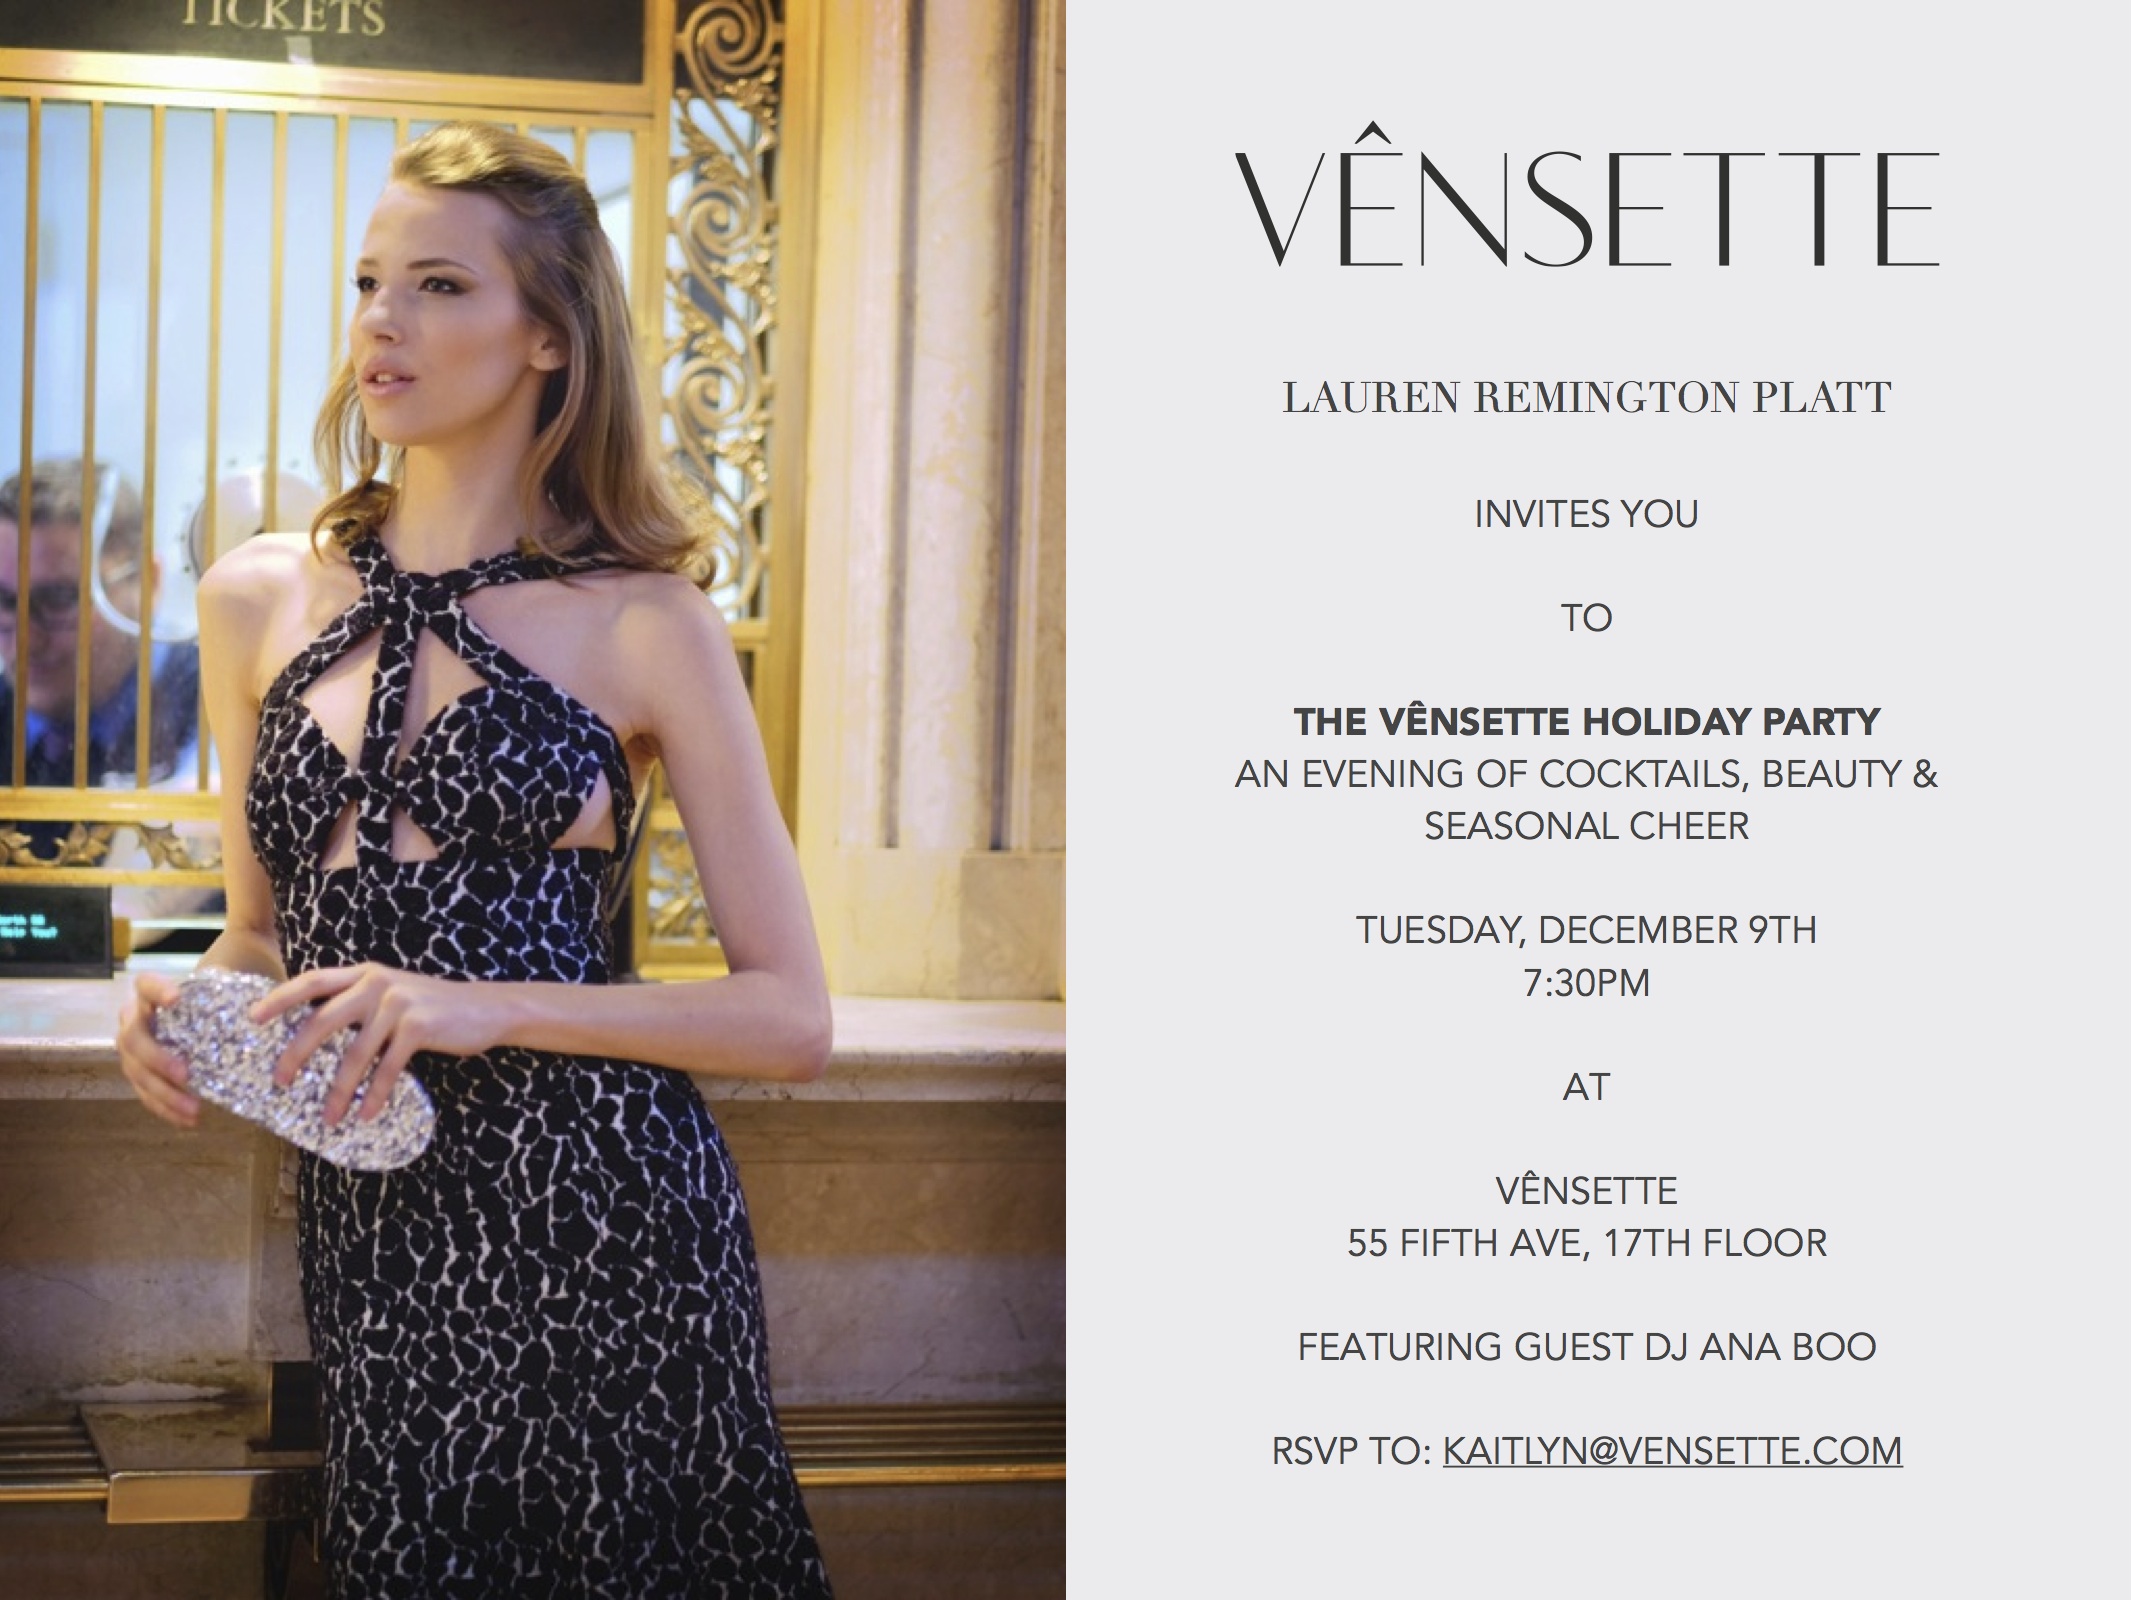 VENSETTE HOLIDAY PARTY